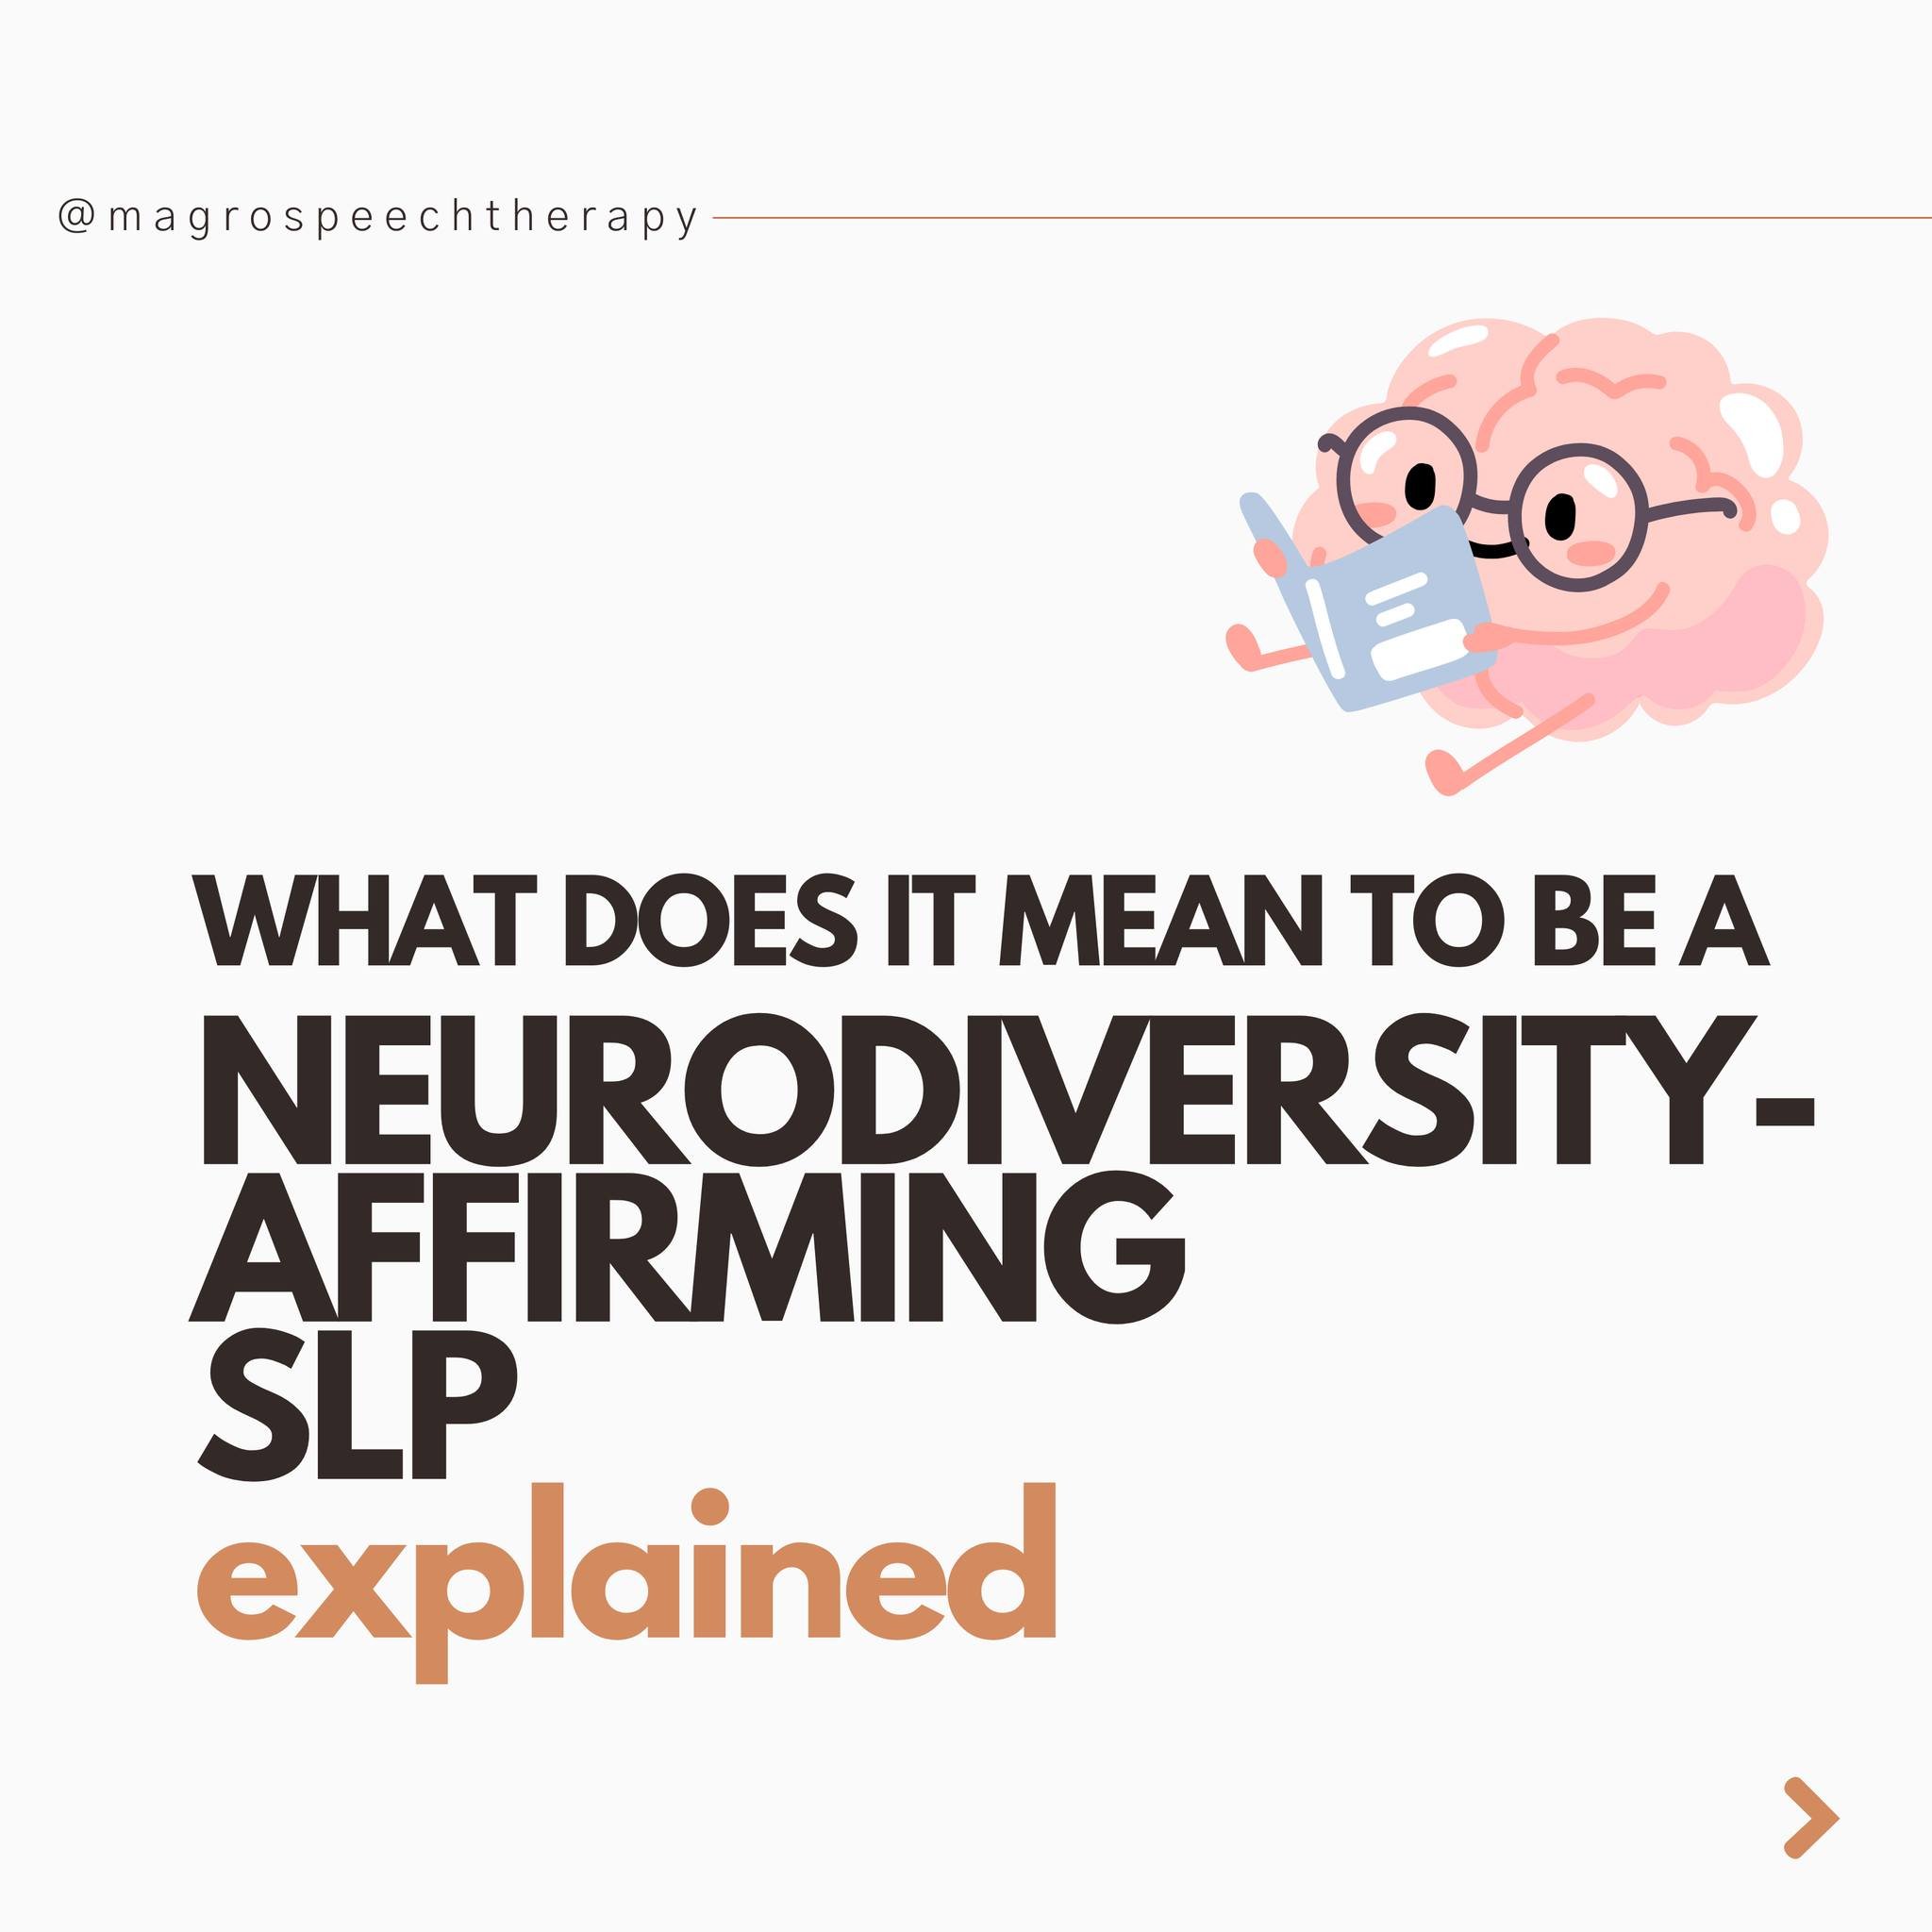 &ldquo;The way forward is not to seek a way of changing autistic people to make them &lsquo;fit in&rsquo; but to change society to make all of us more tolerant of diversity.&rdquo; &ndash; Mitchell et al., 2021

A neurodiversity-affirming SLP will:
-